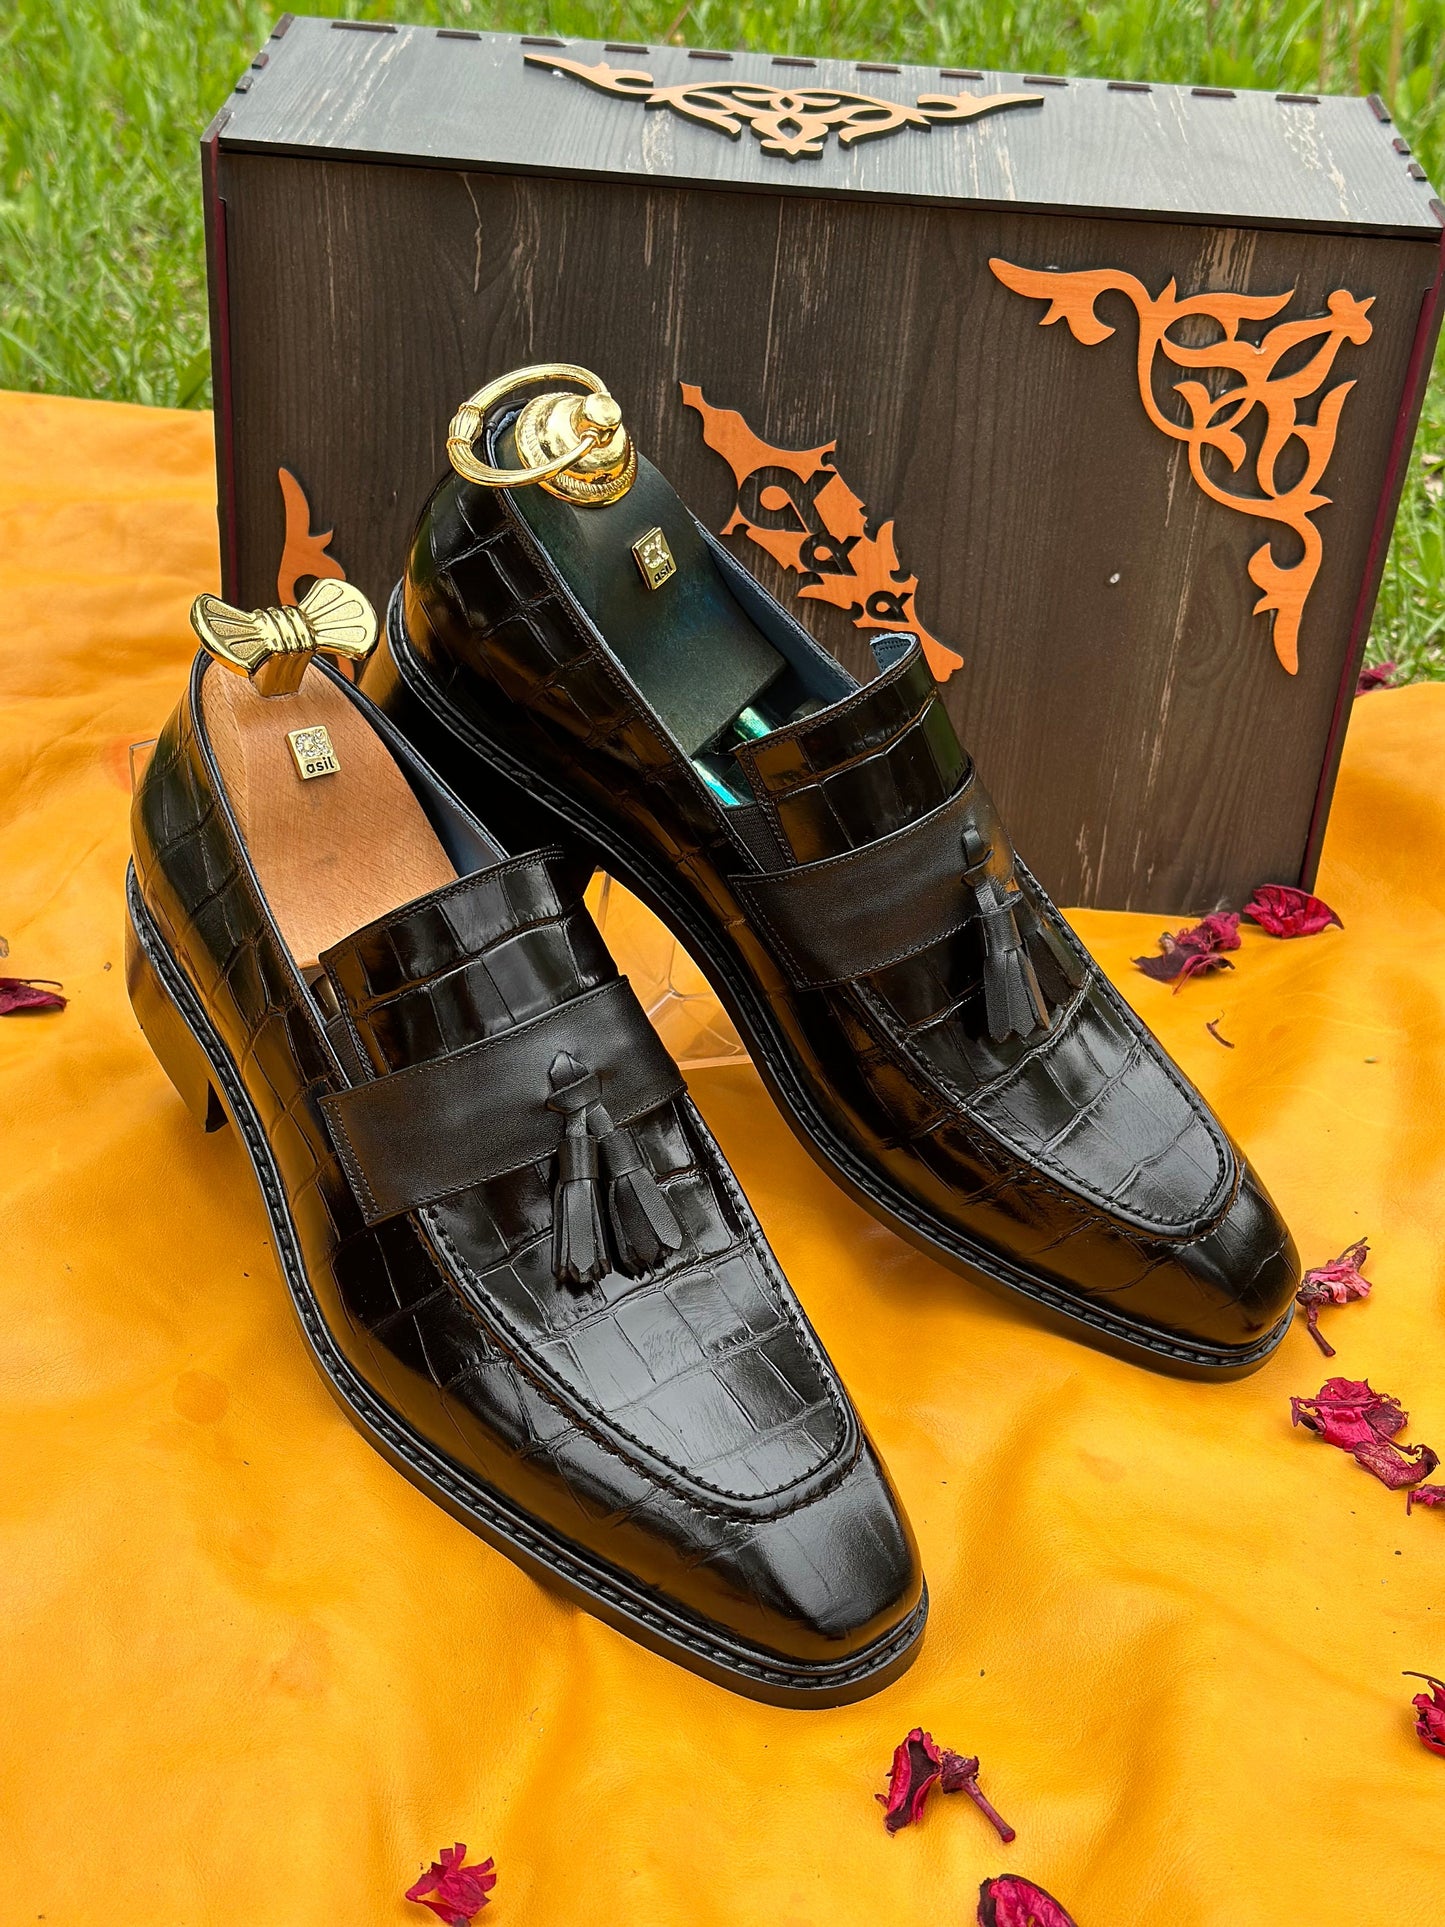 Croco Leather Men Dress Shoes Luxury Oxford Derby Shoes Party Shoes Custom Shoes Kiltie Loafer Made-To-Order Leather Sole